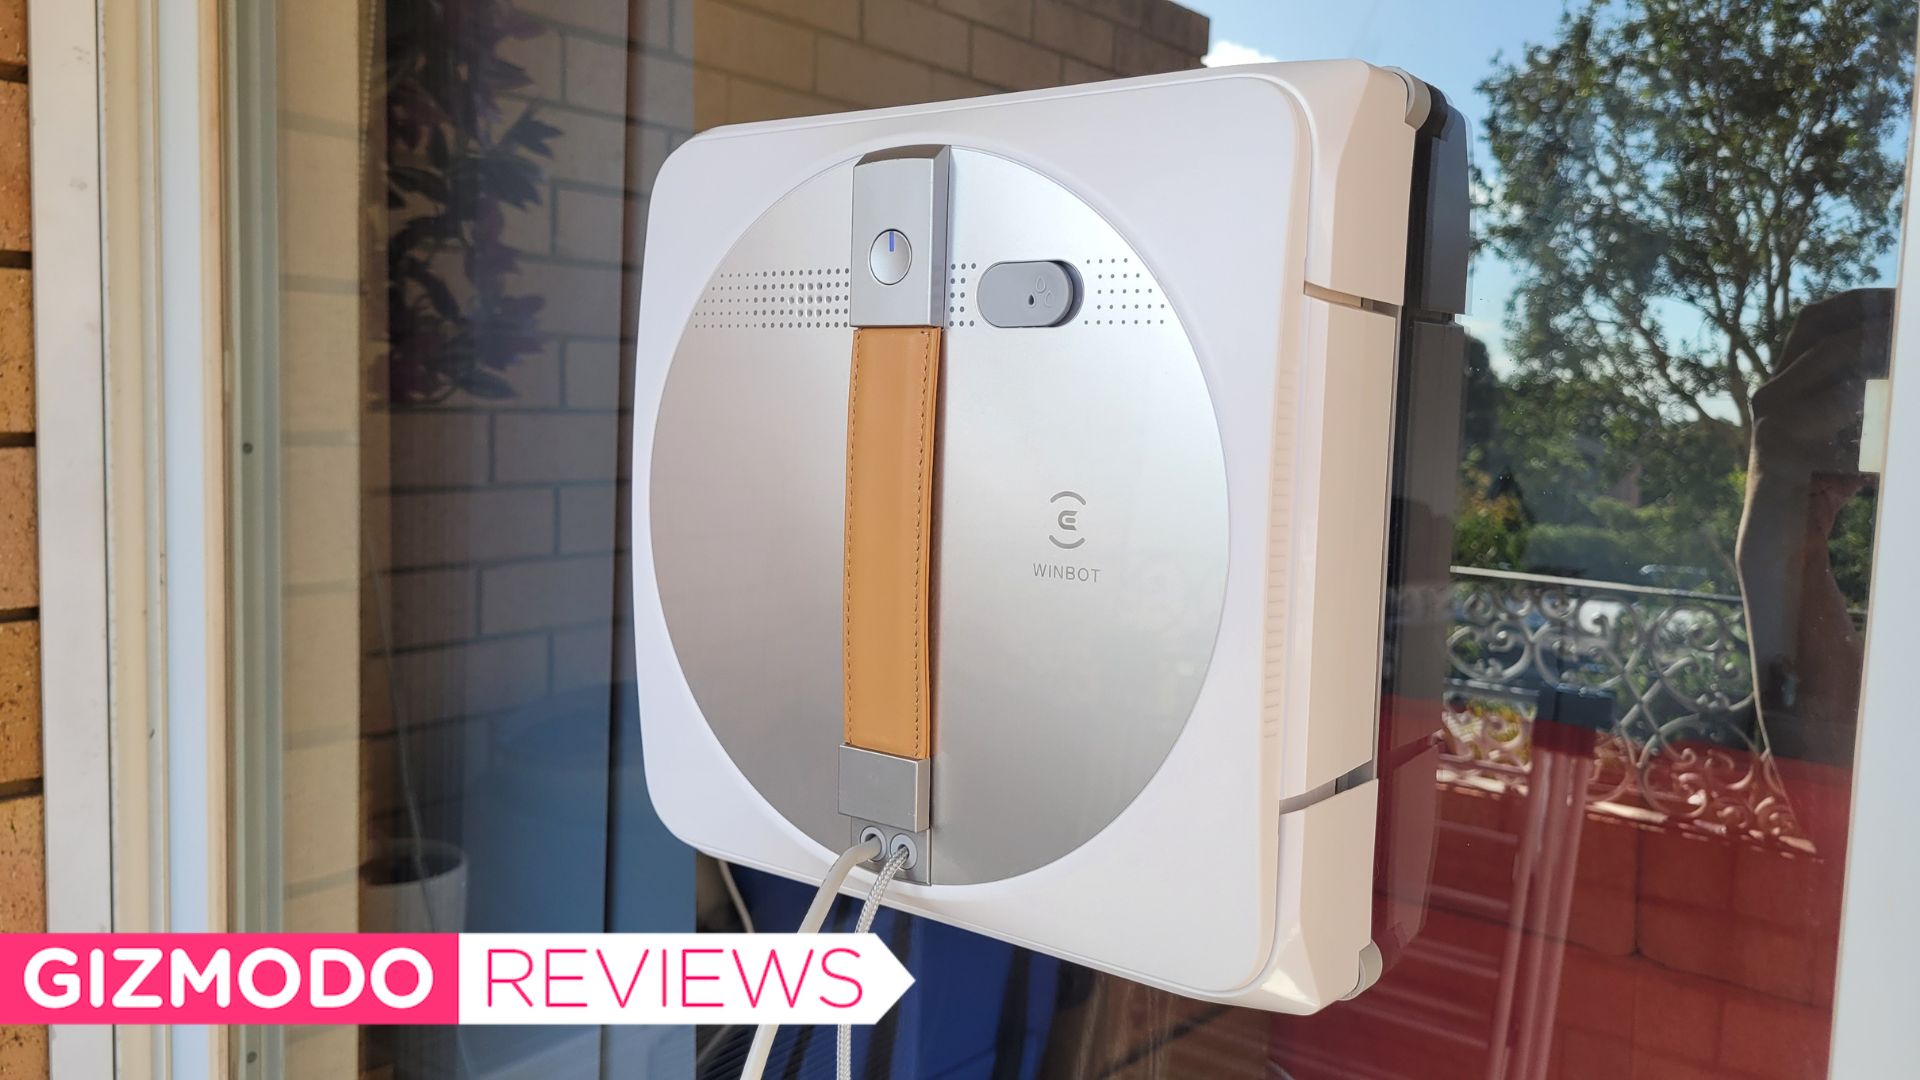 Ecovacs WINBOT W1 PRO review